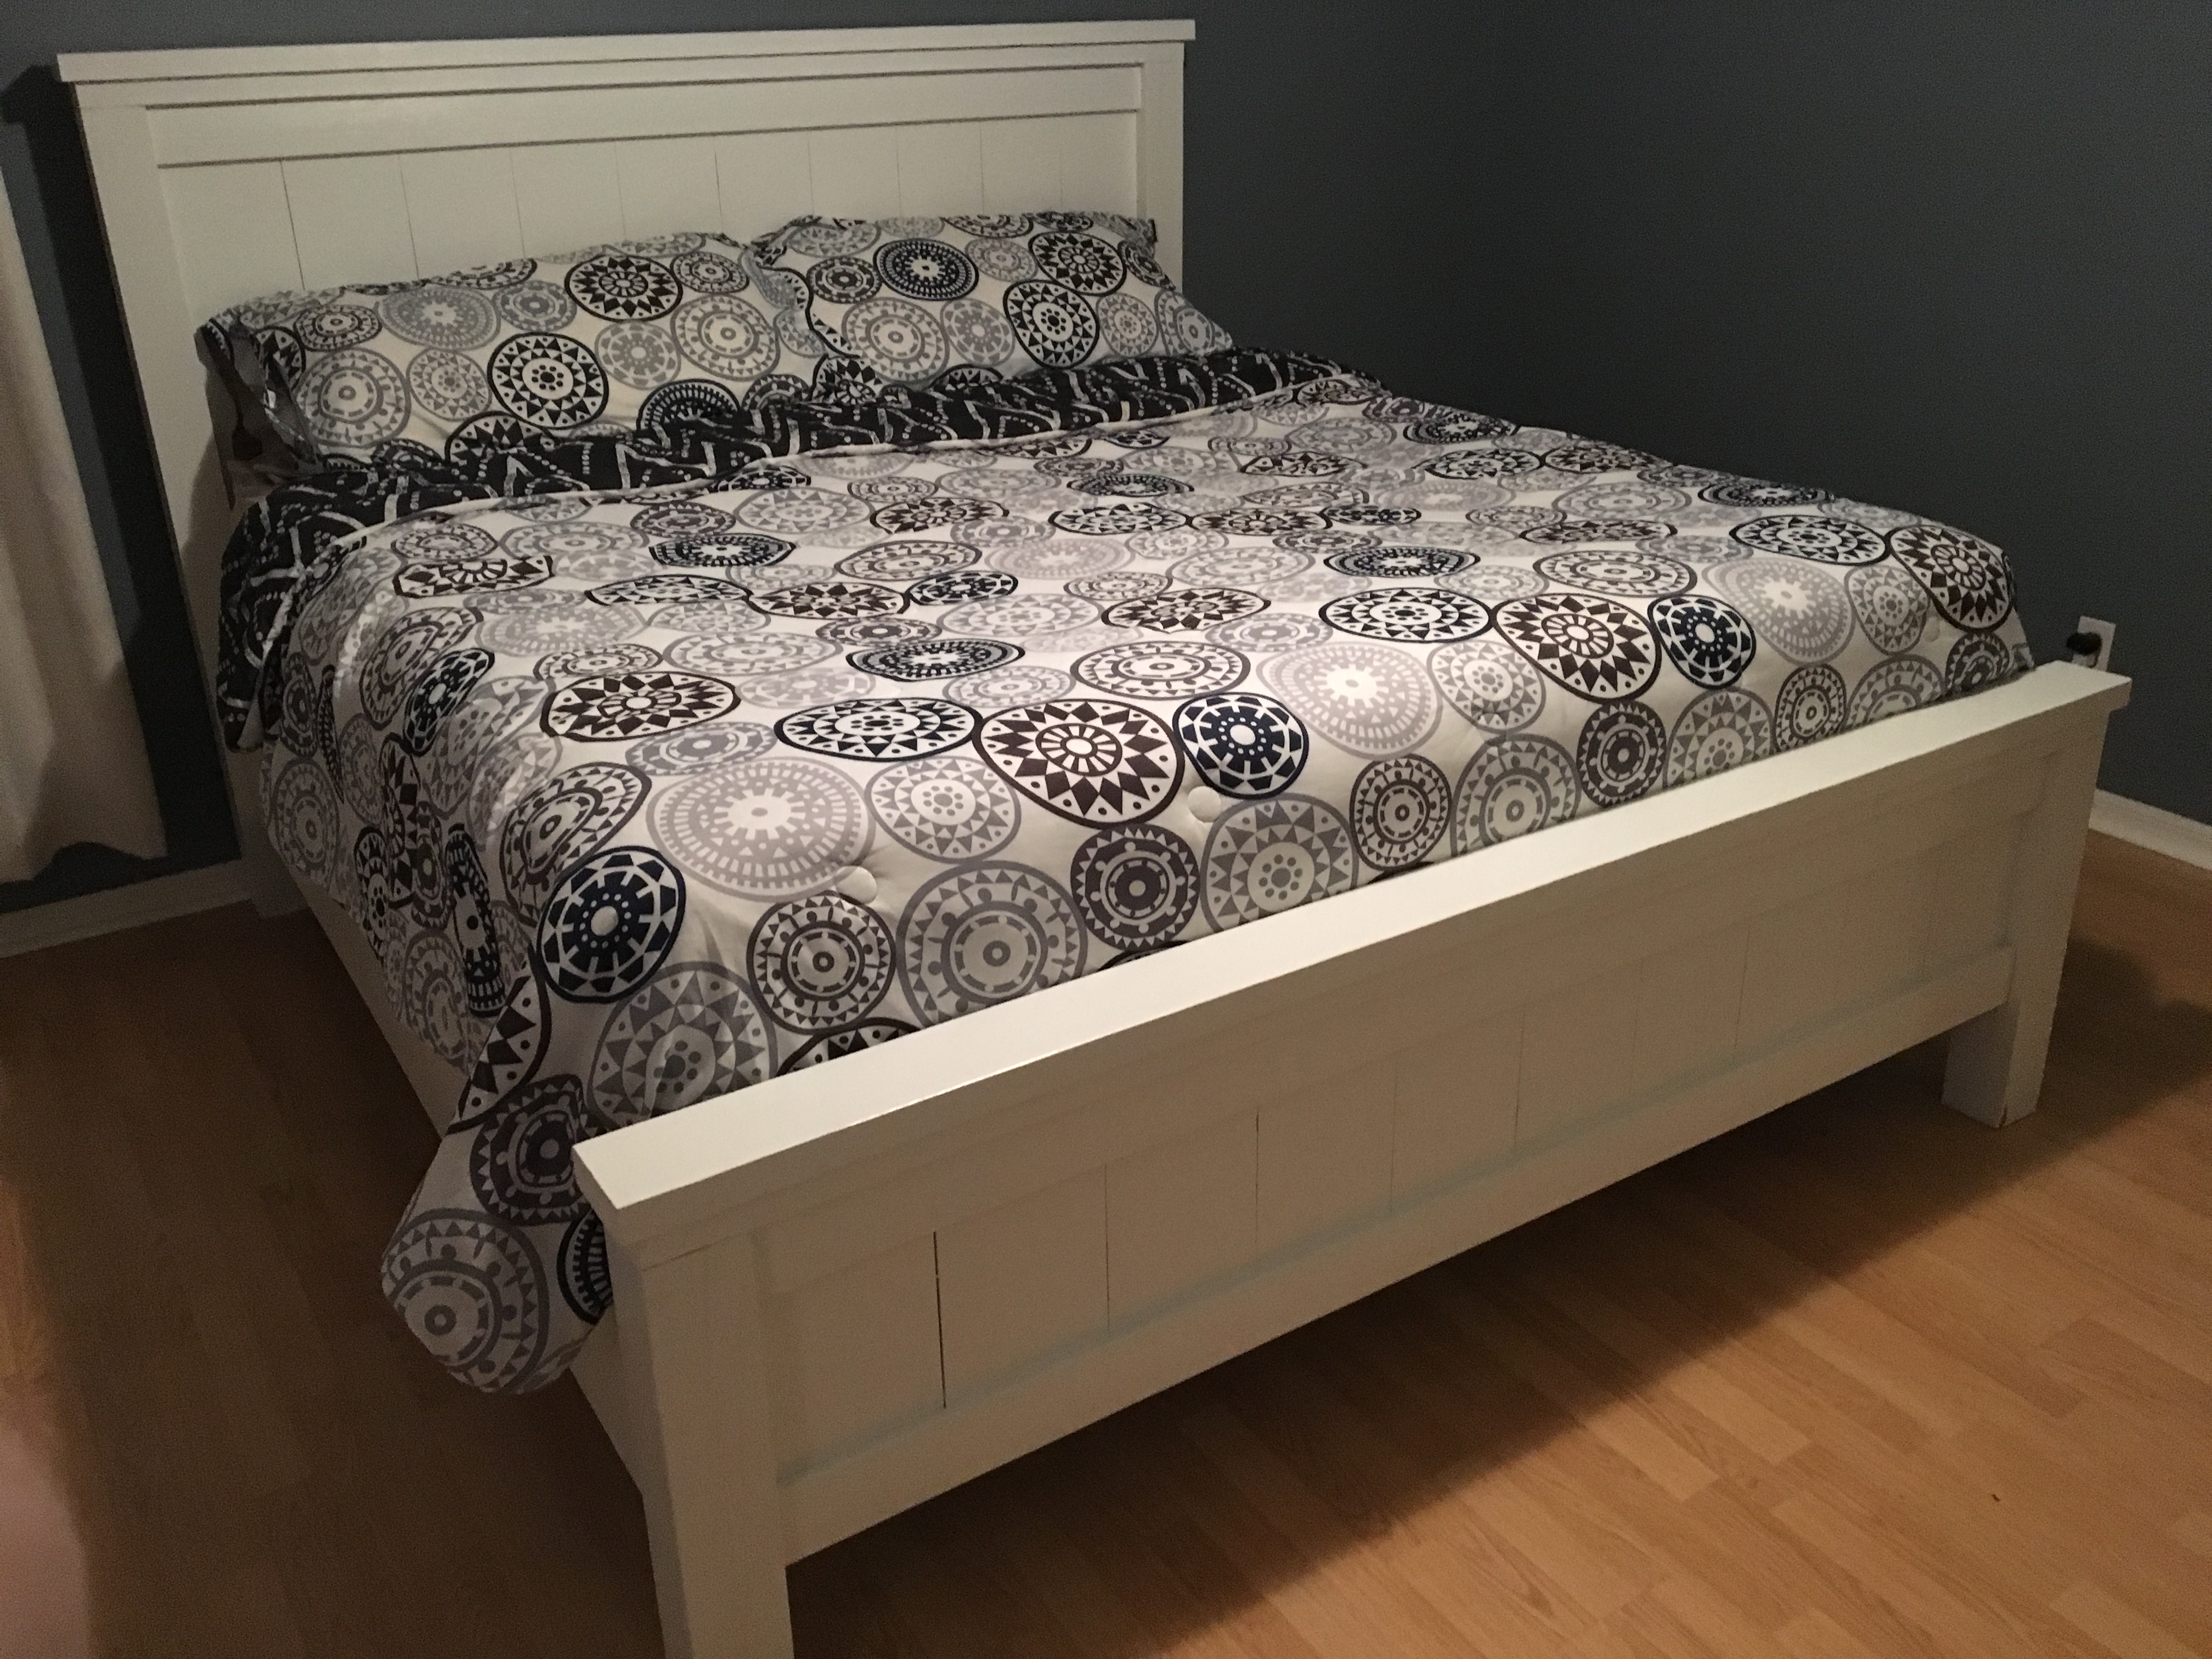 Ana White | Farmhouse king bed frame - DIY Projects